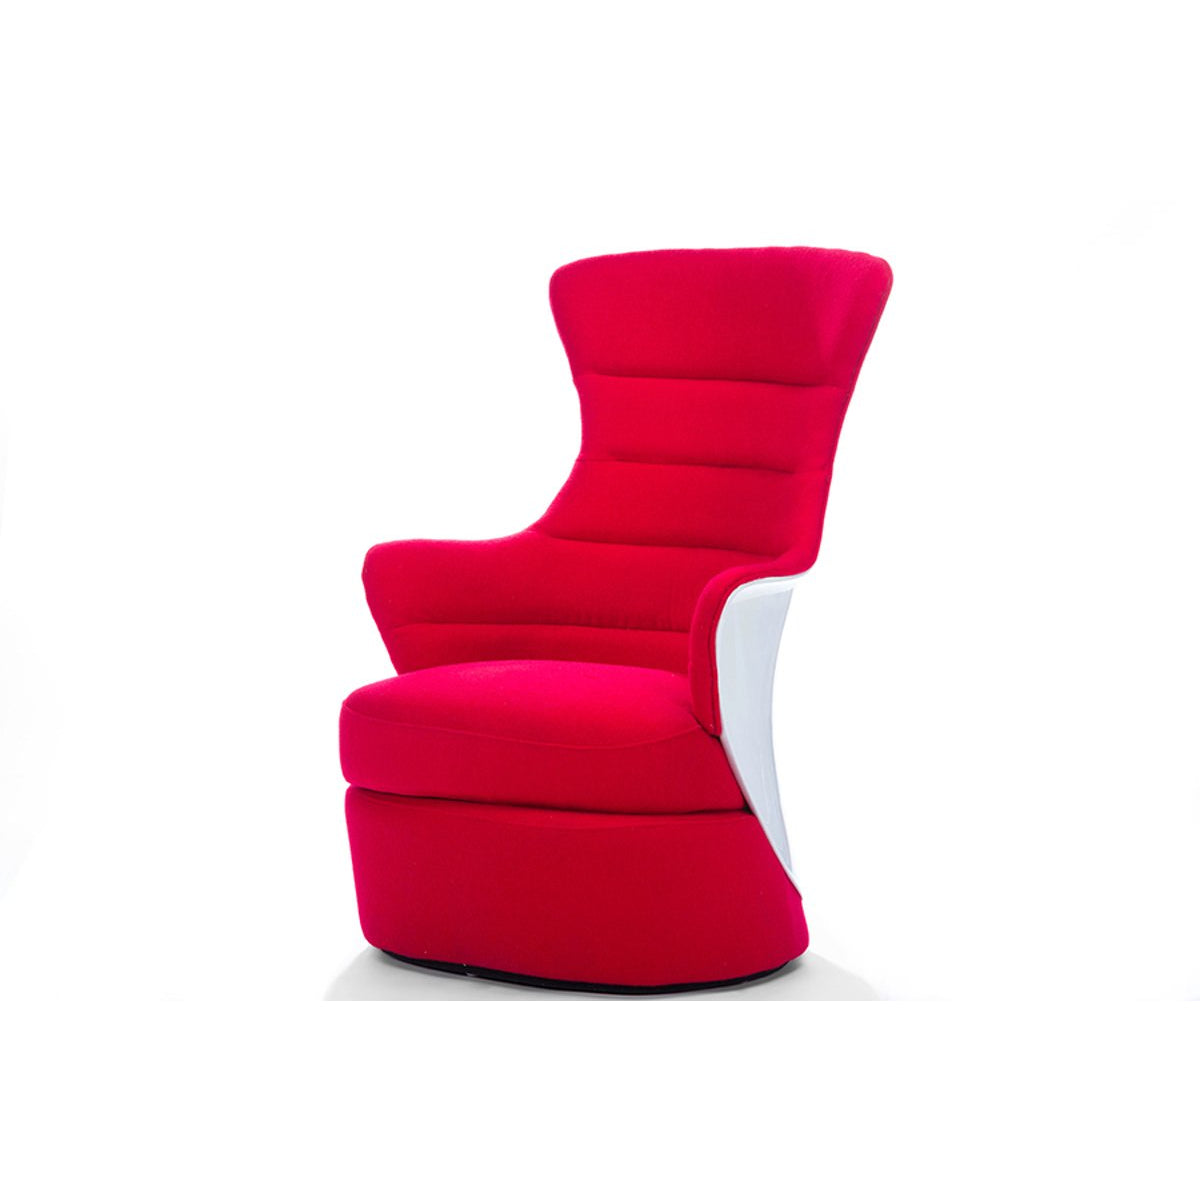 Baxton Studio Conundrum Red Fabric & White Plastic Contemporary Armchair Baxton Studio-chairs-Minimal And Modern - 1